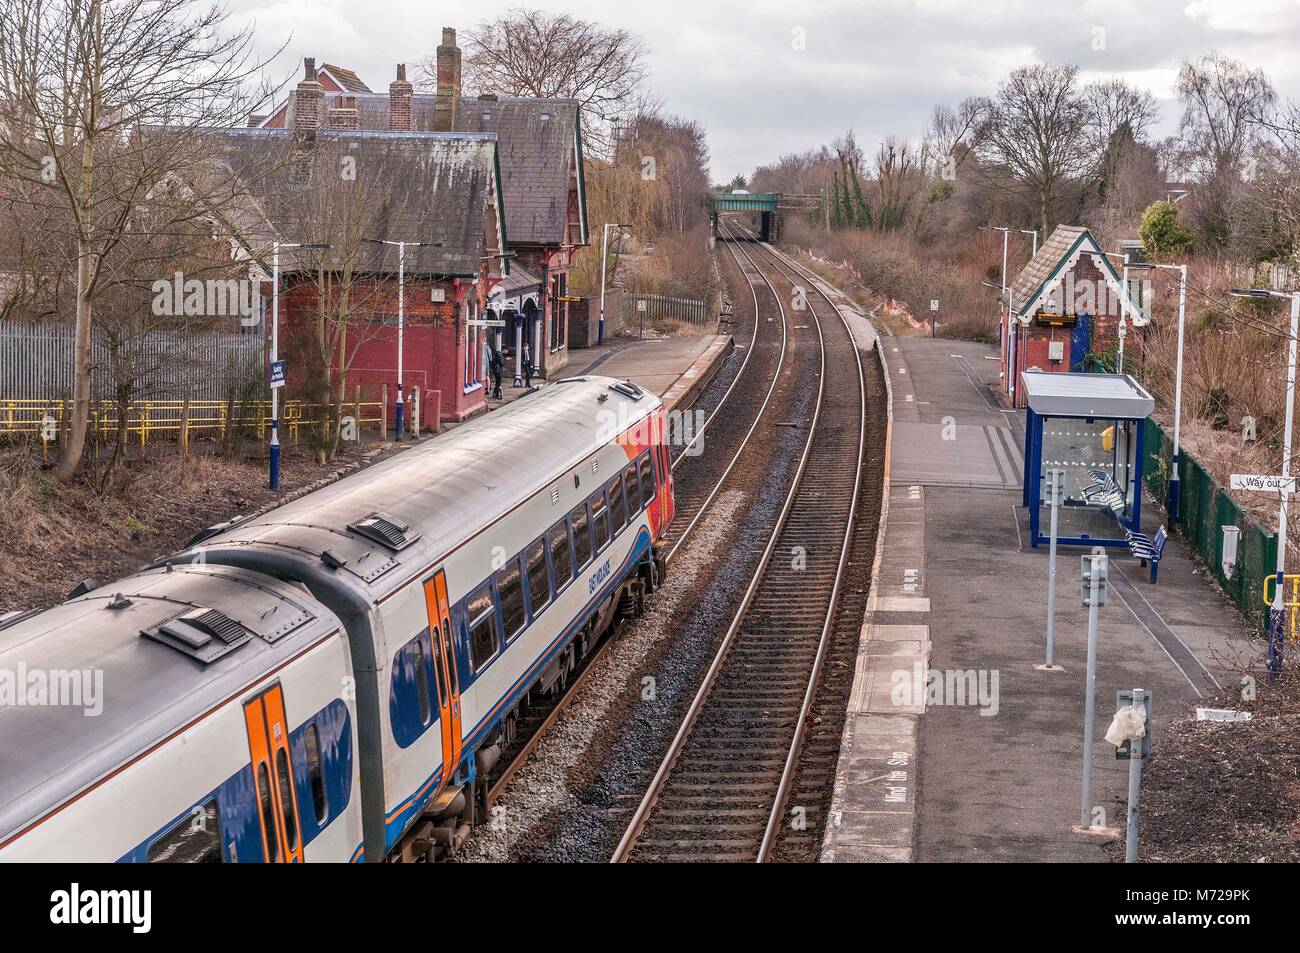 A Class 156 diesel multiple unit train passing through the rural station at Sankey in Cheshire. East Midlands Trains Stock Photo